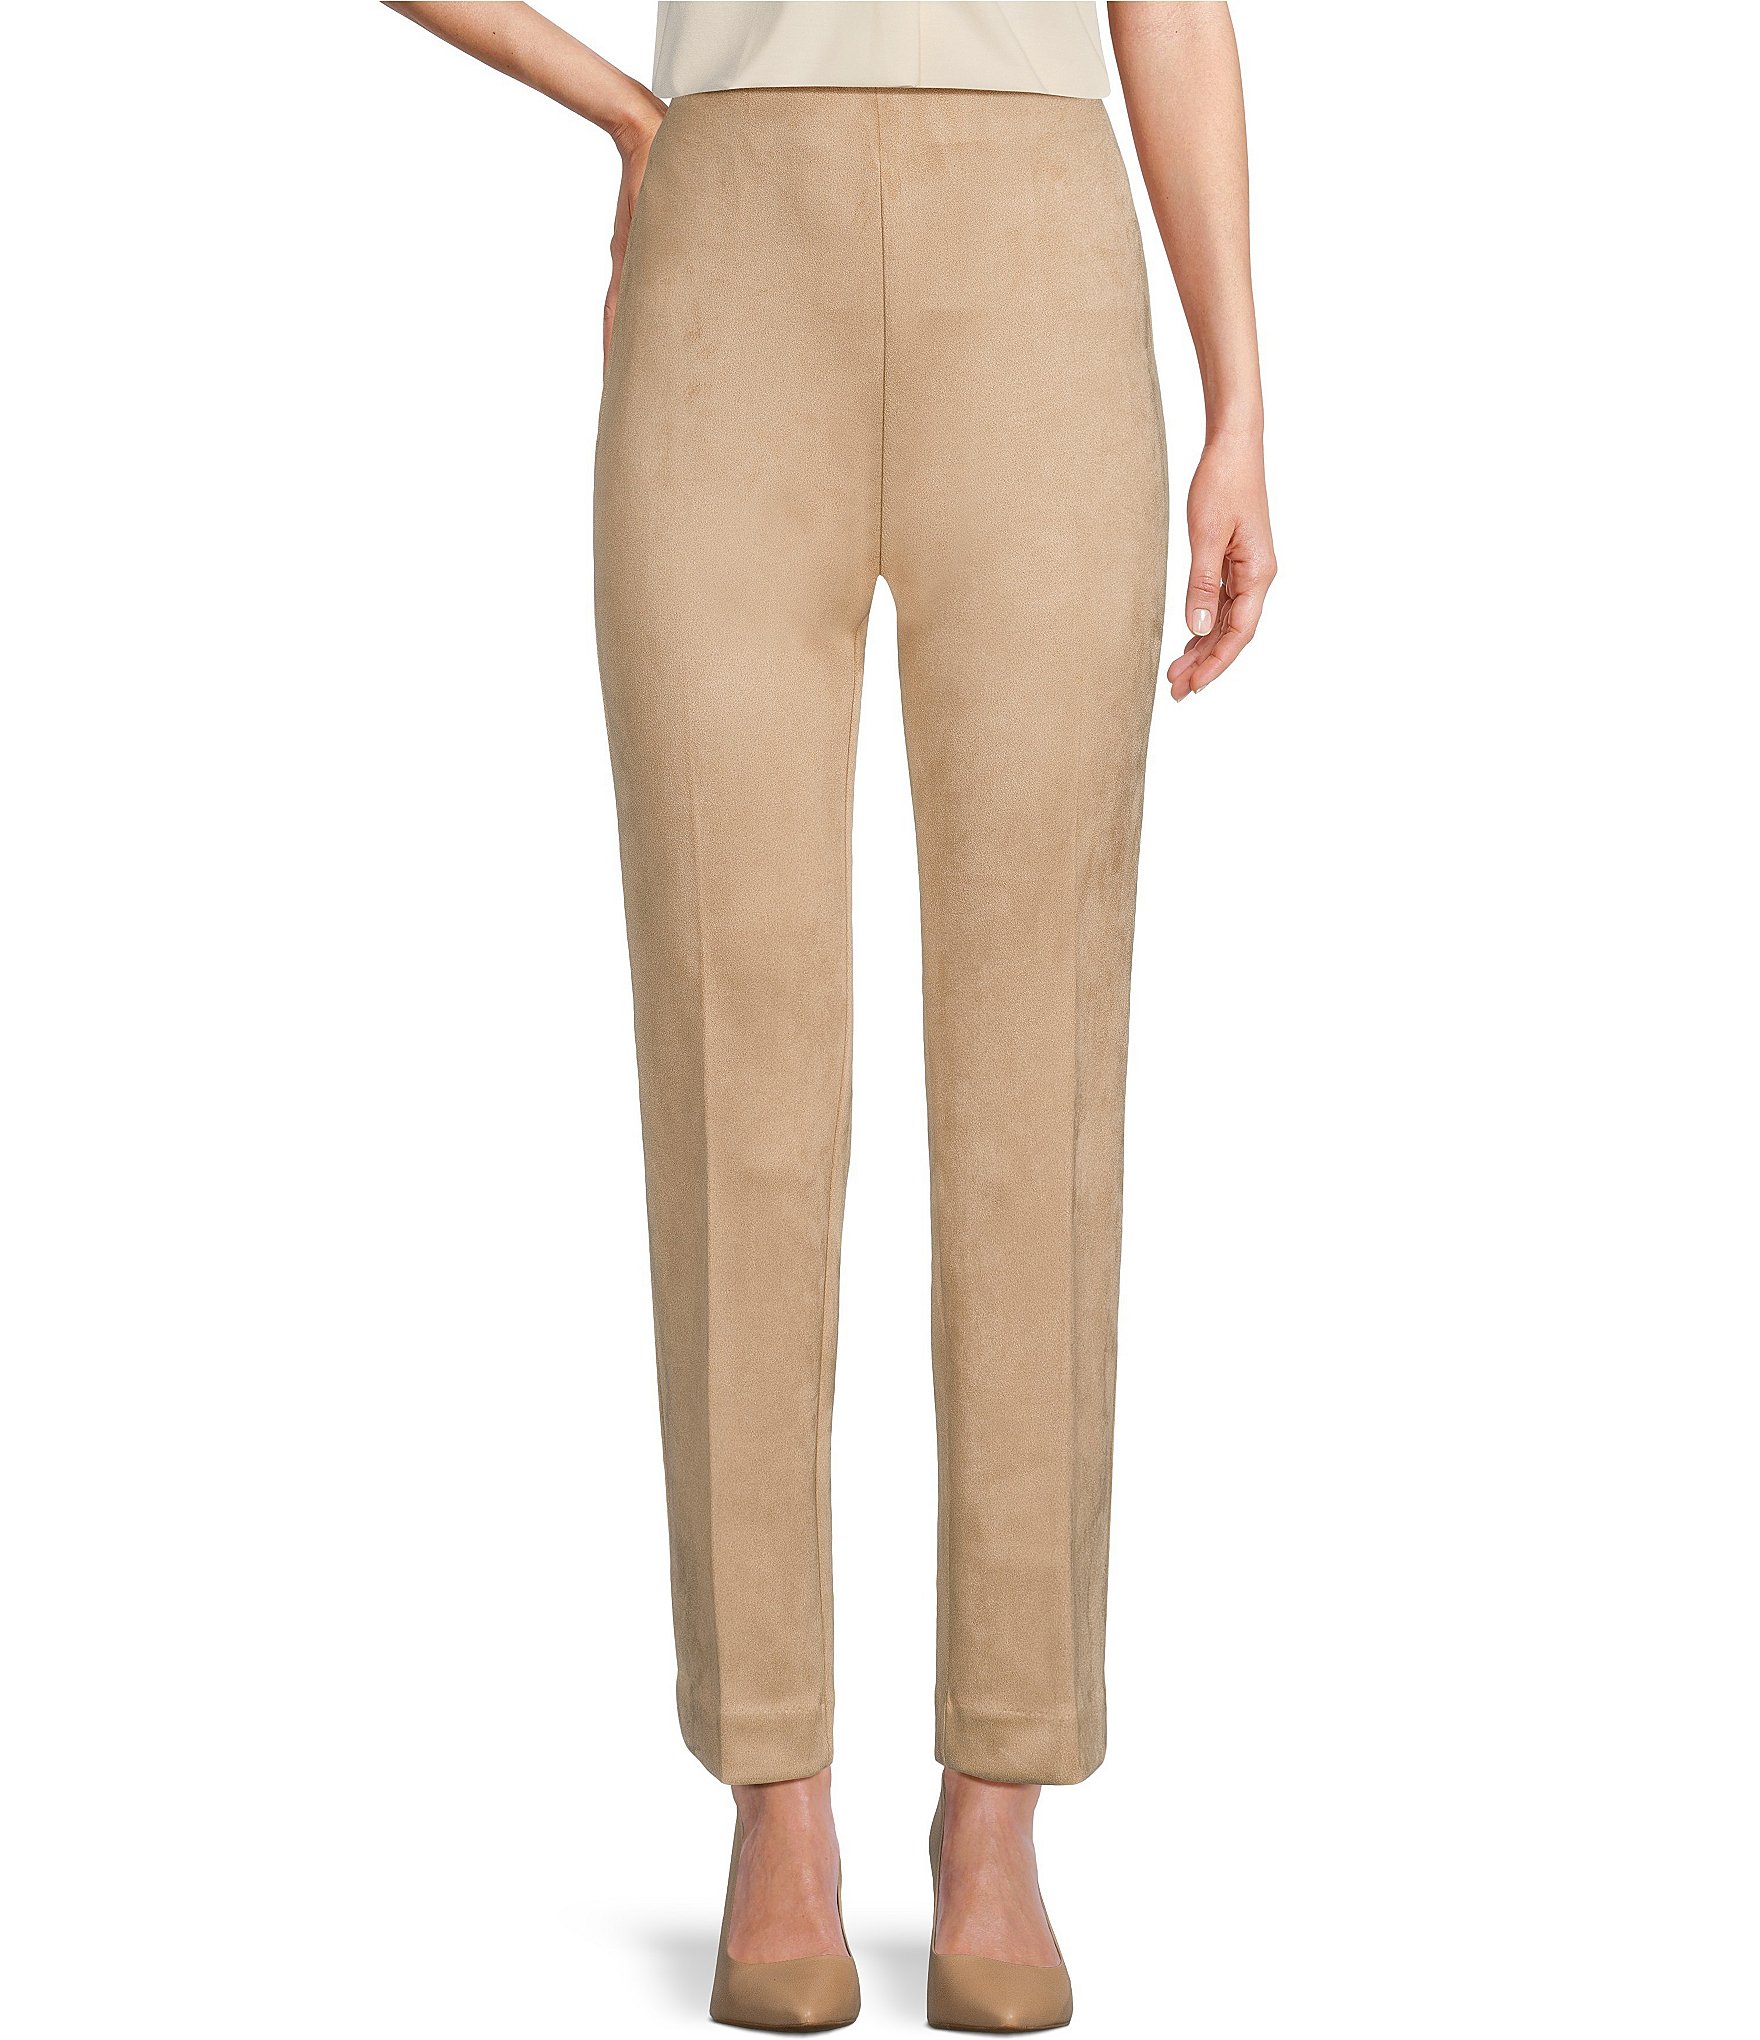 Anne Klein Women's Pull-On Hollywood-Waist Ankle Pants